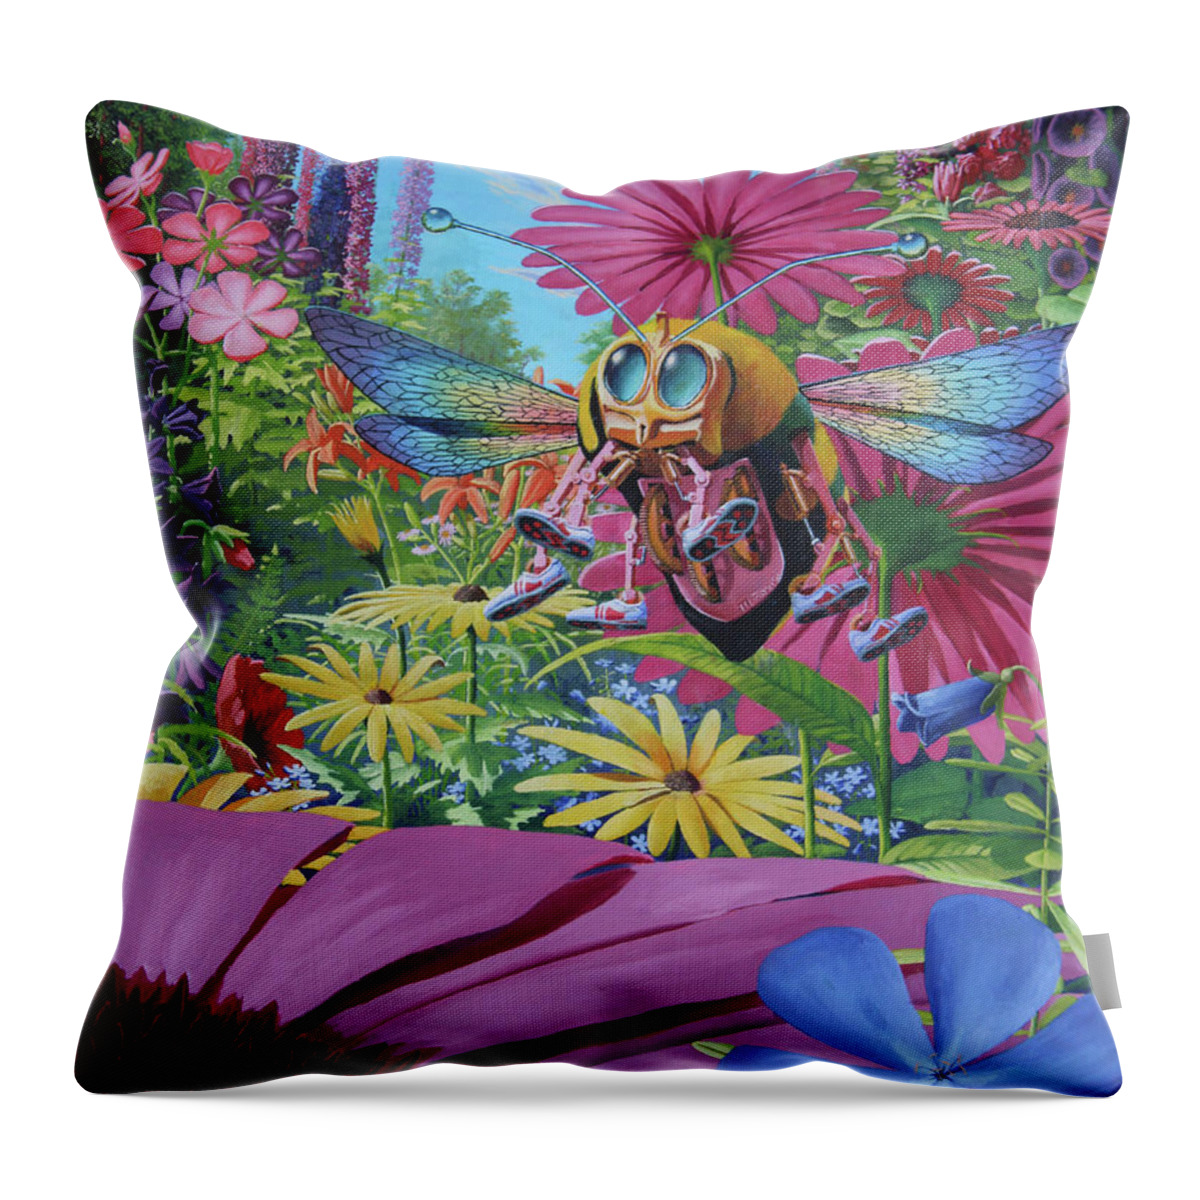 Bumblebee Throw Pillow featuring the painting Bumblehover by Michael Goguen